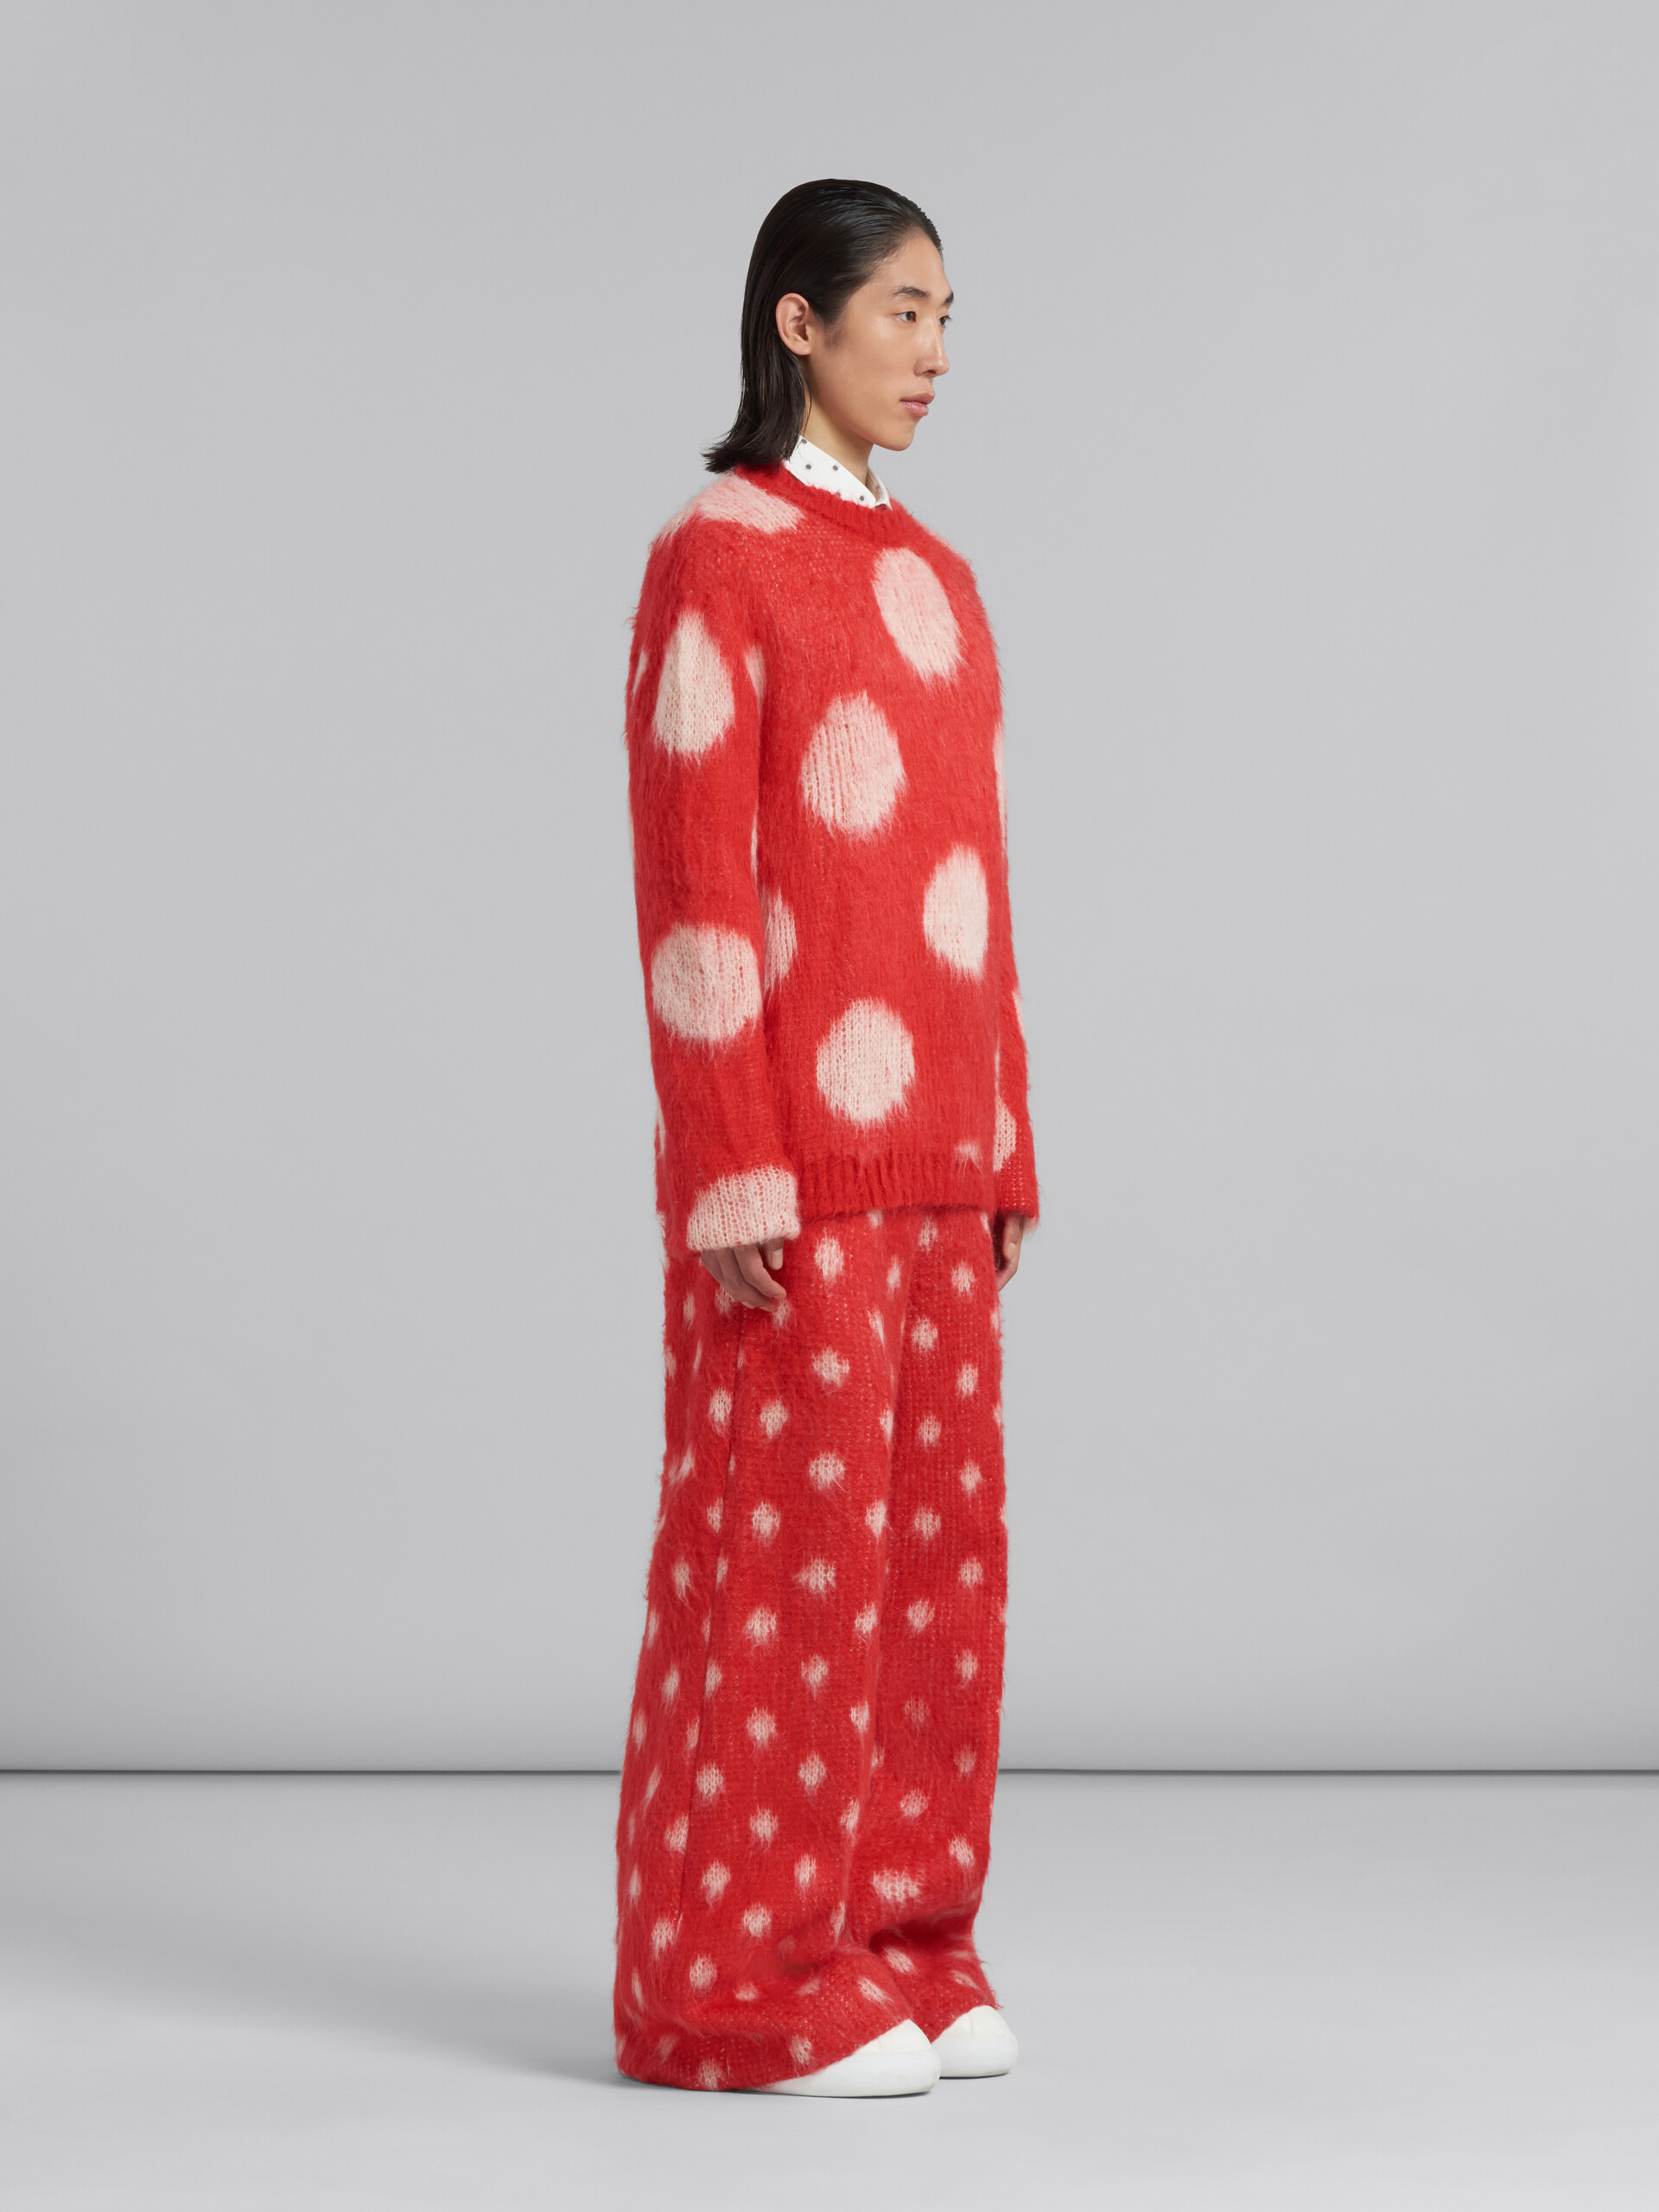 Red mohair jumper with maxi polka dots - Pullovers - Image 5